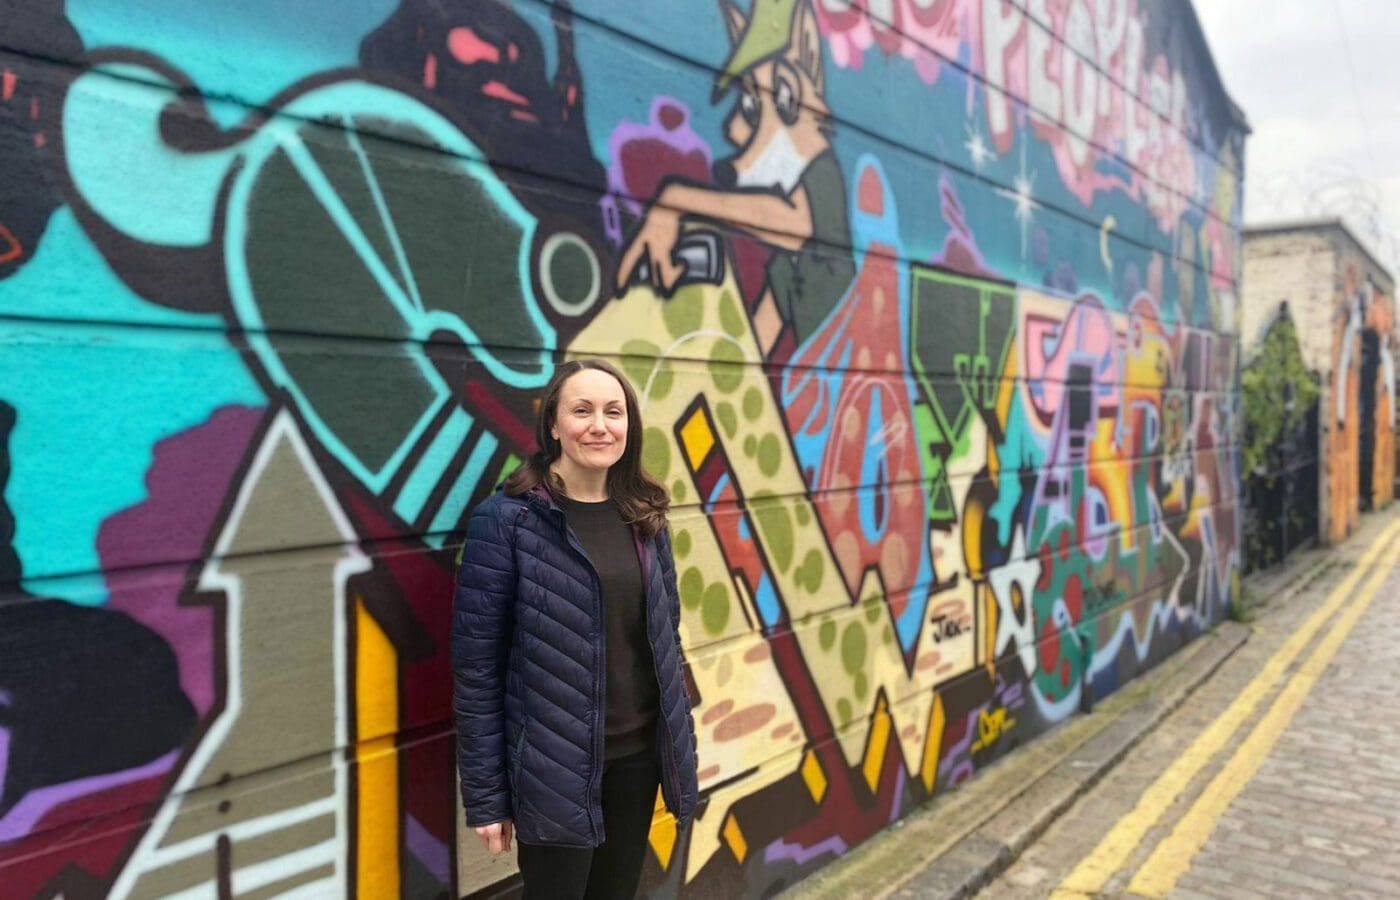 A white woman stands in front of a bright graffiti wall